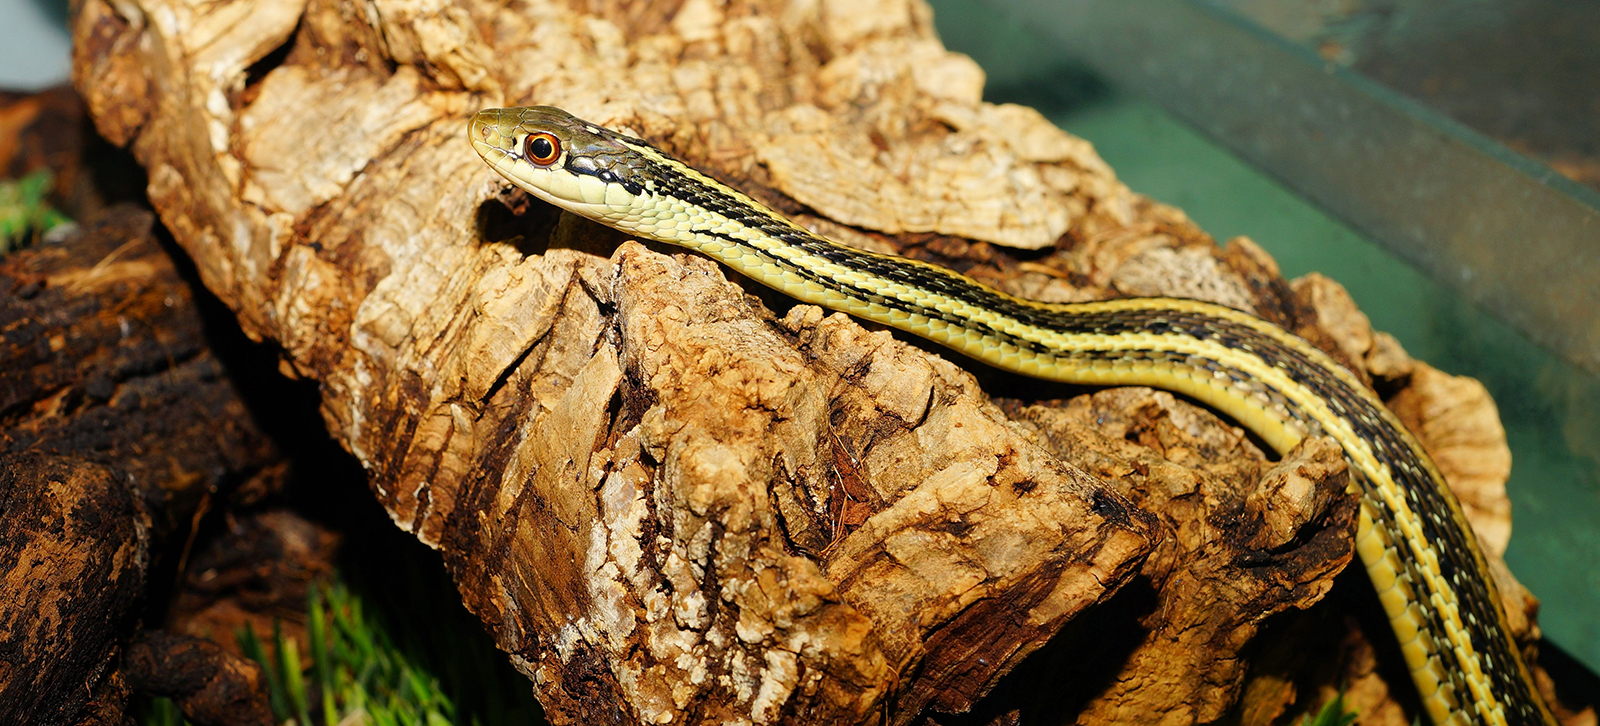 A snake relaxes on a log.